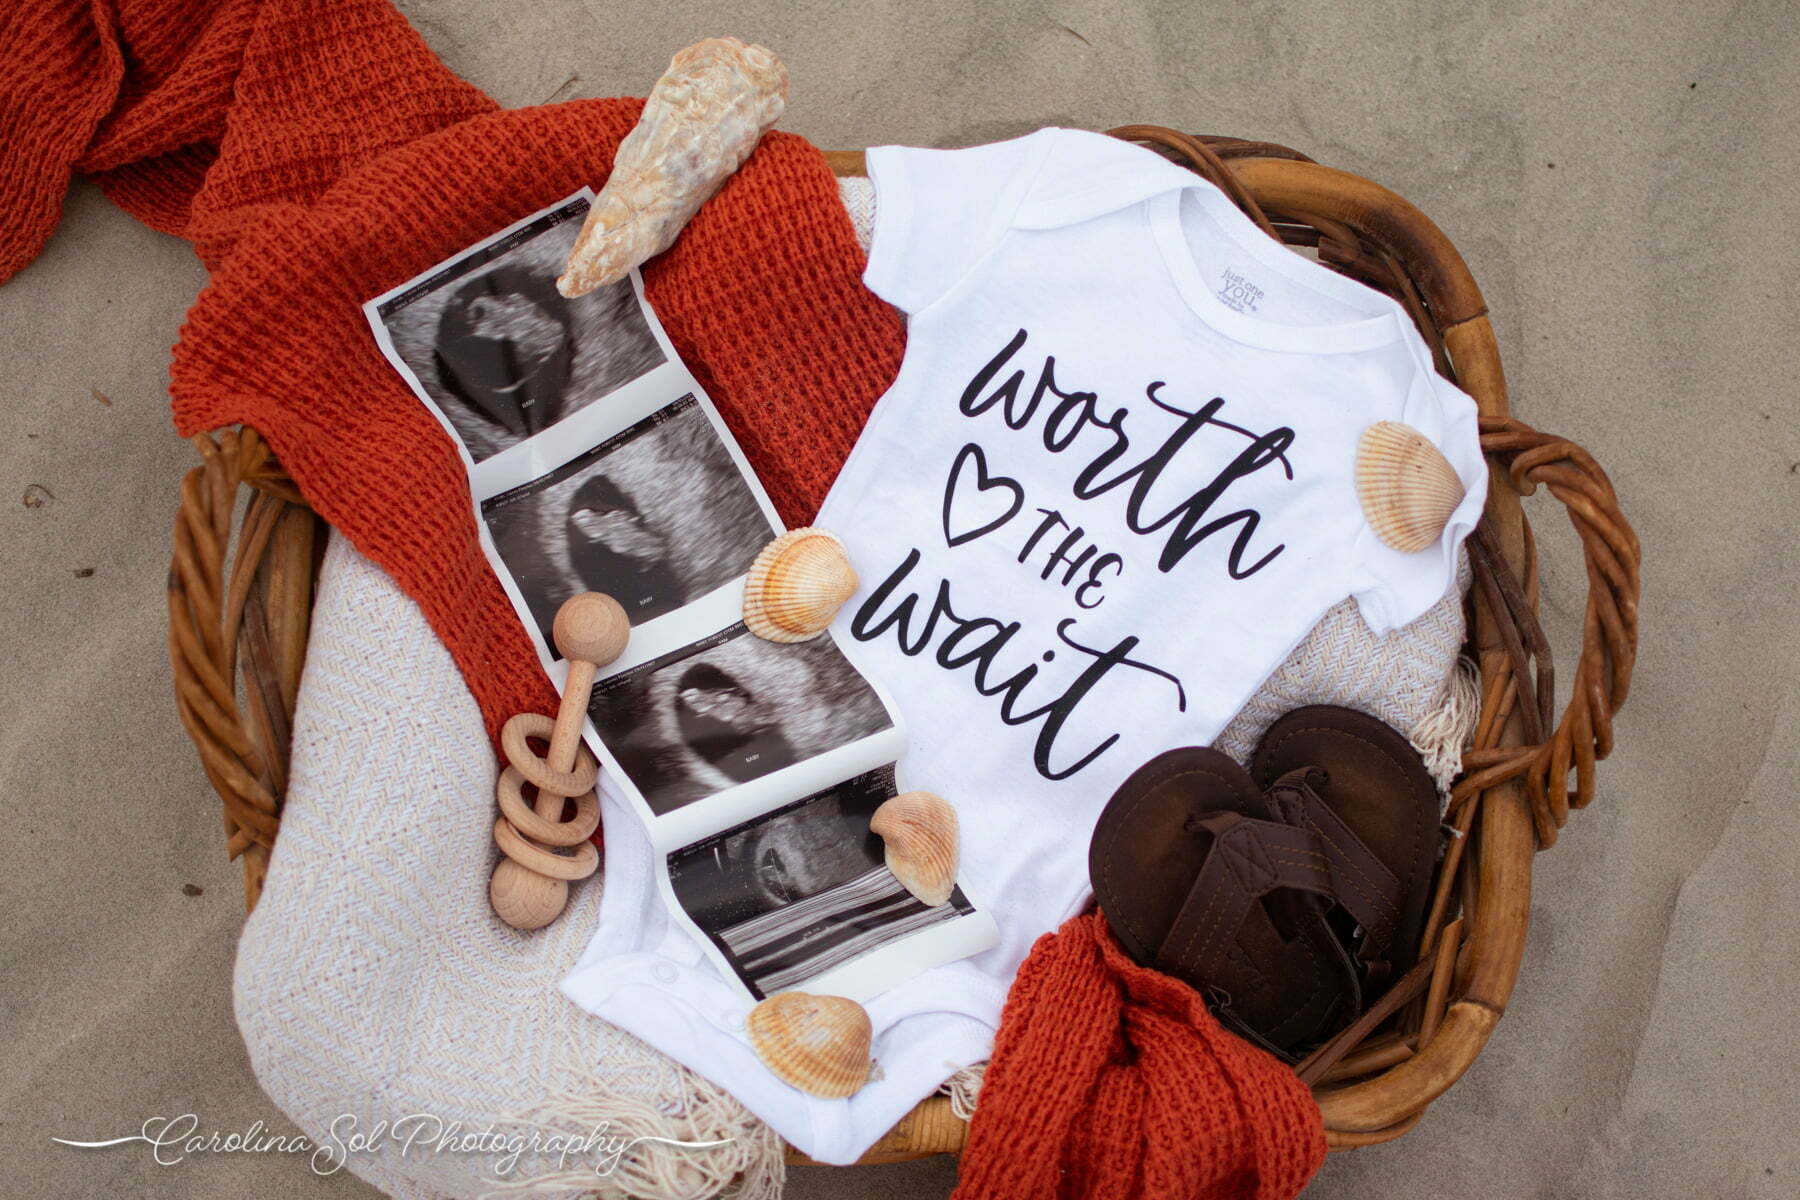 - Introducing The Crotts Family of 3 - Exciting Sunset Beach Pregnancy Announcement